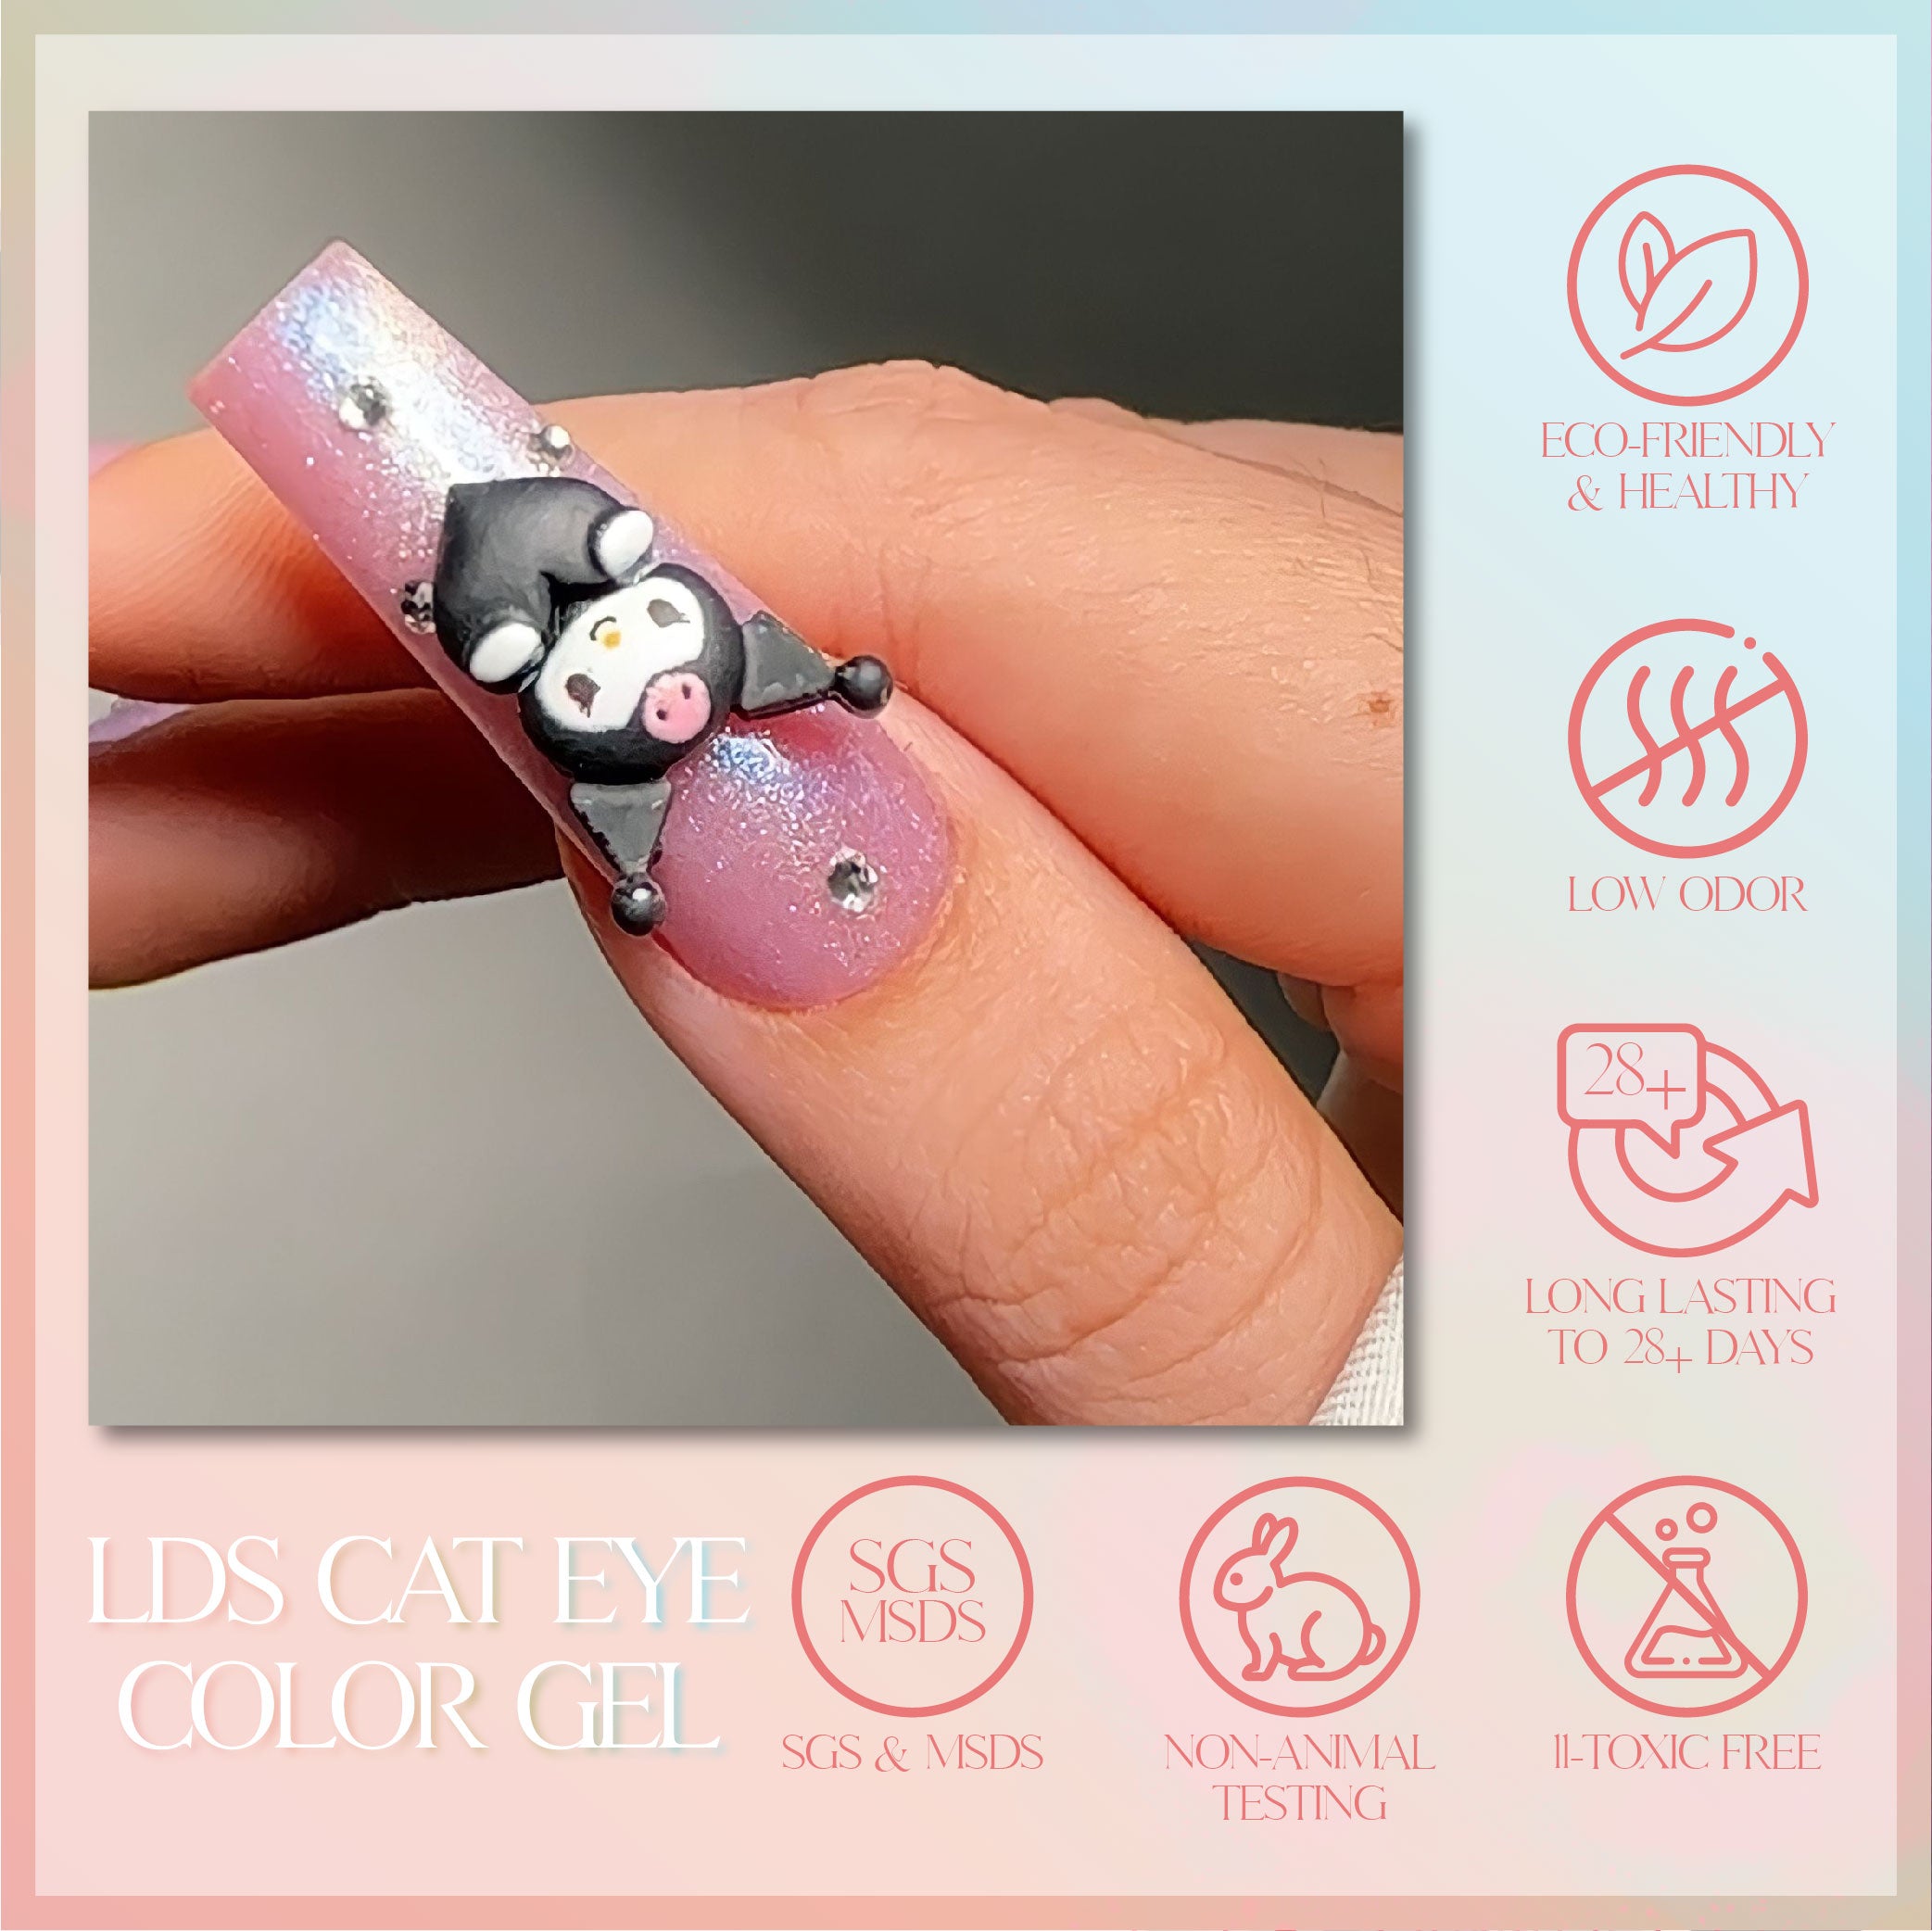 LDS Pearl CE - 05 - Pearl Veil Cat Eye Collection